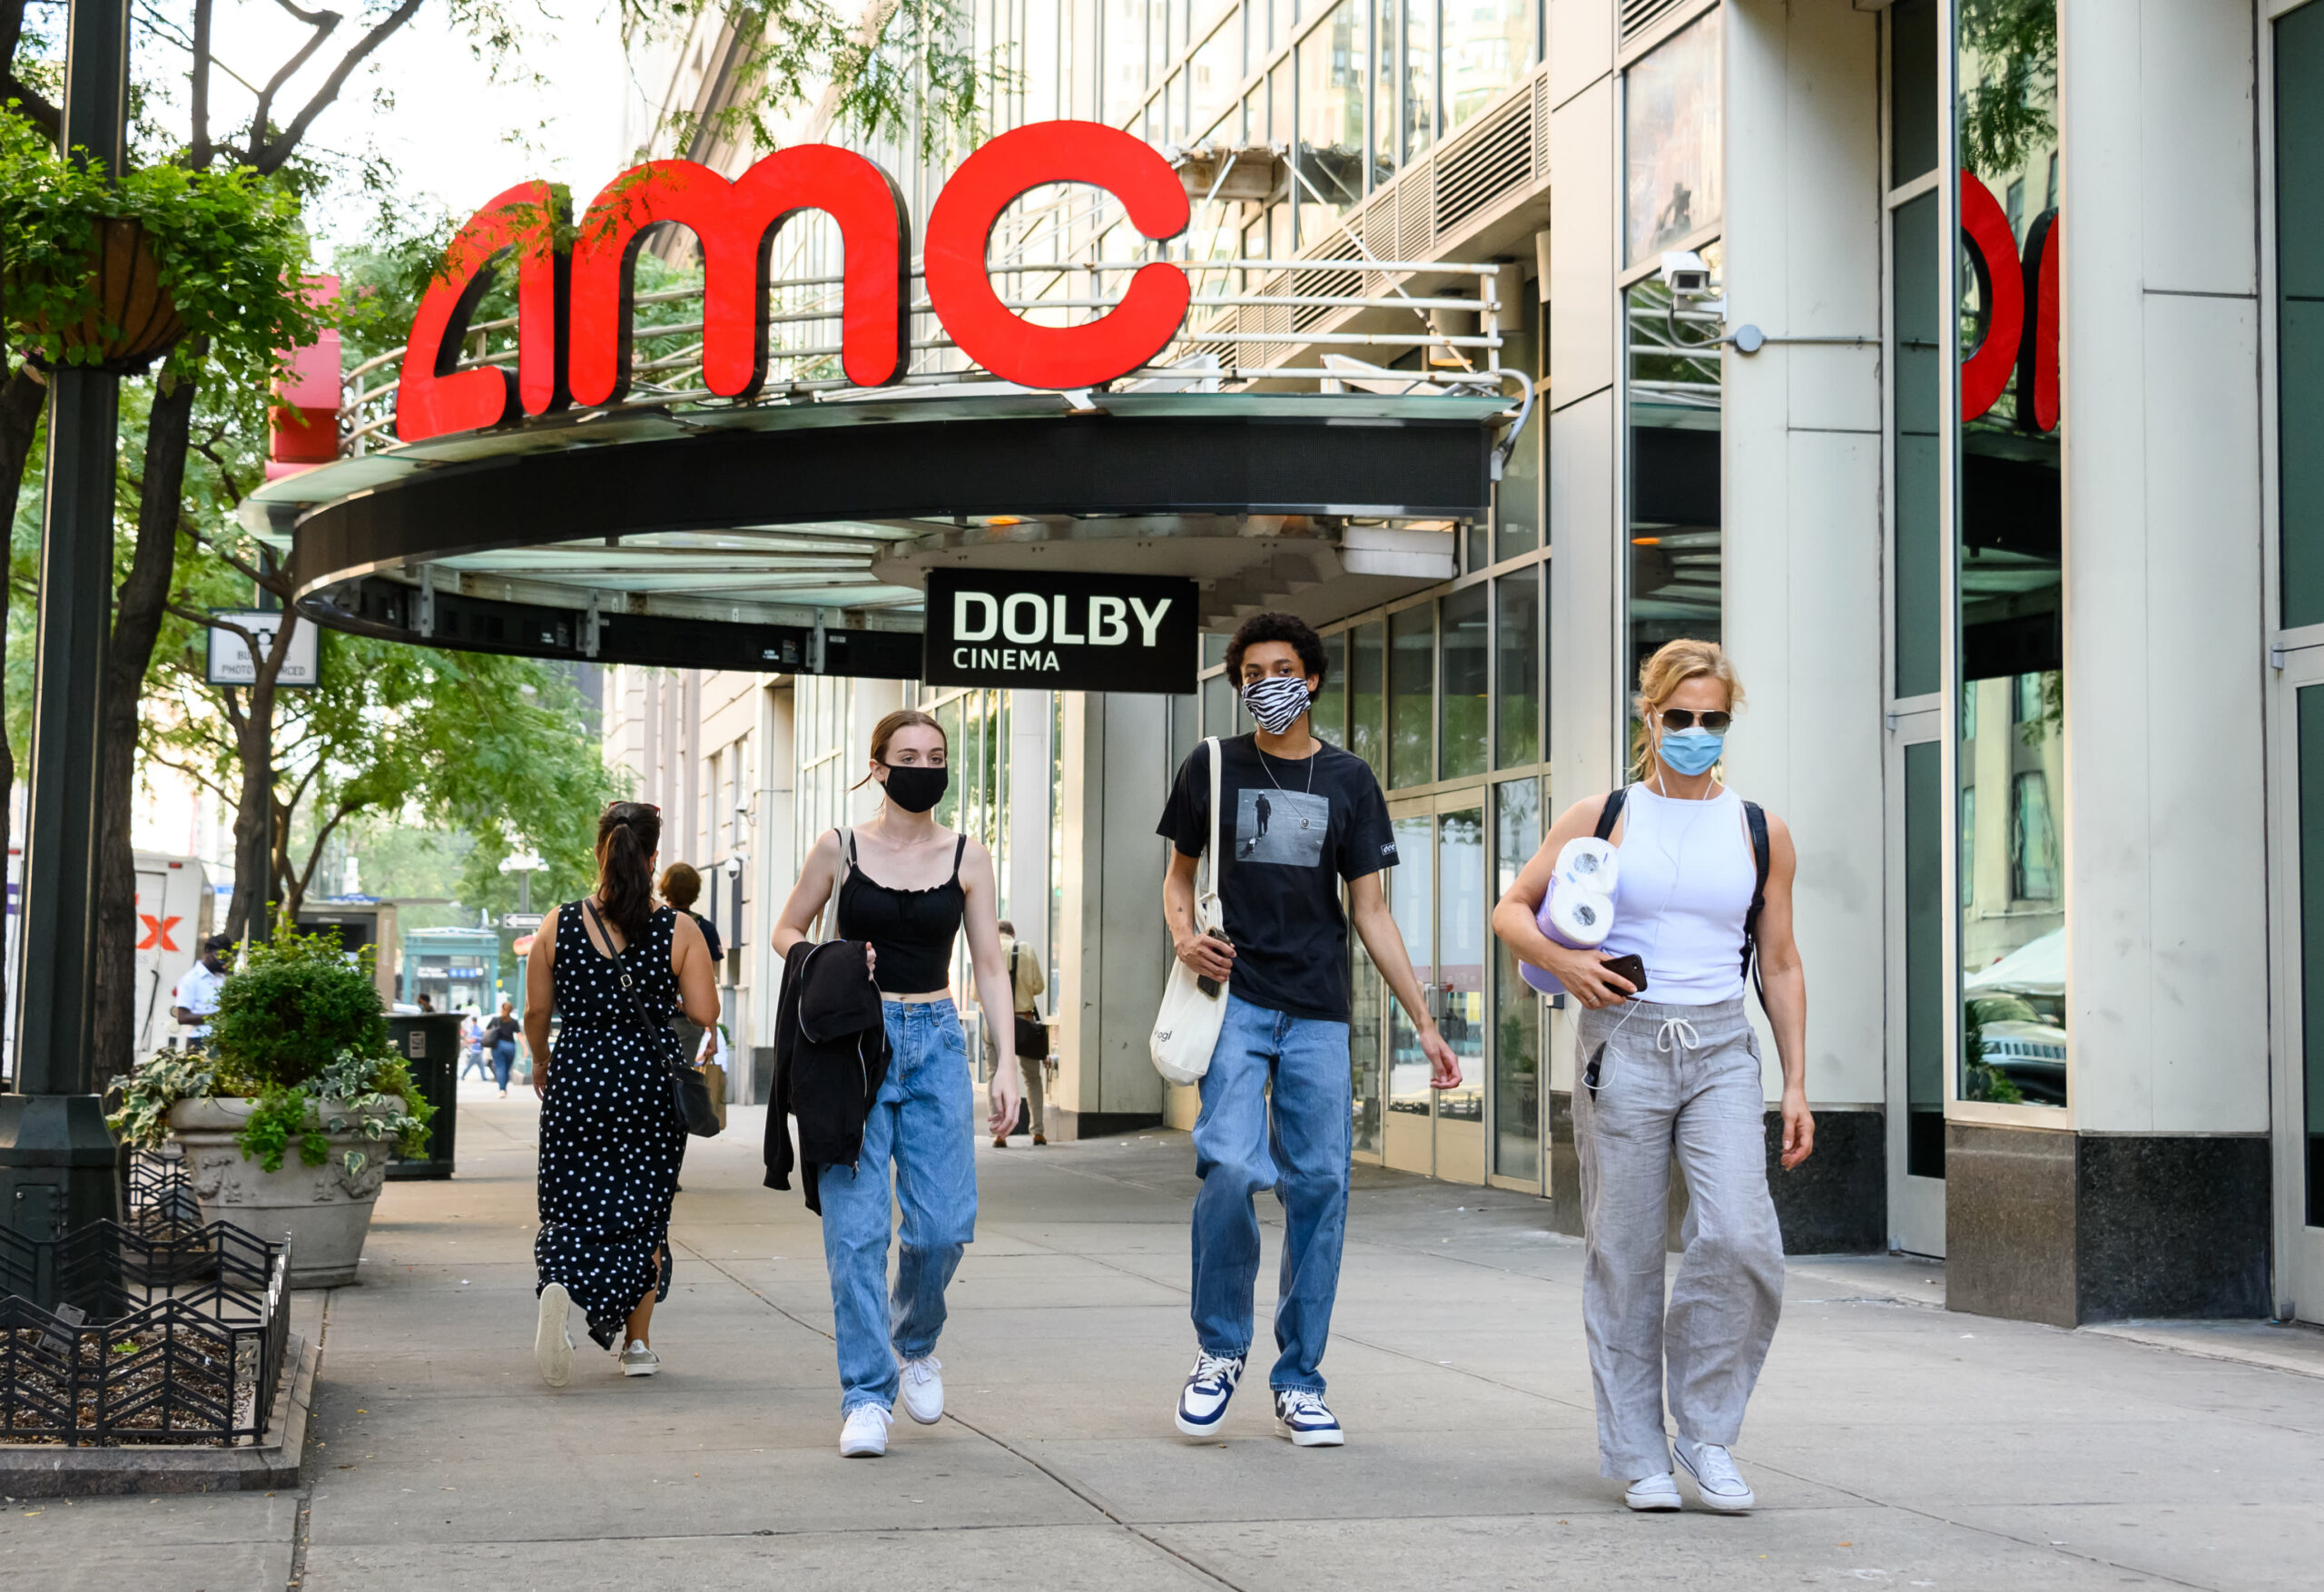 AMC hopes the field workplace reaches $5.2 billion, why that is a giant ask